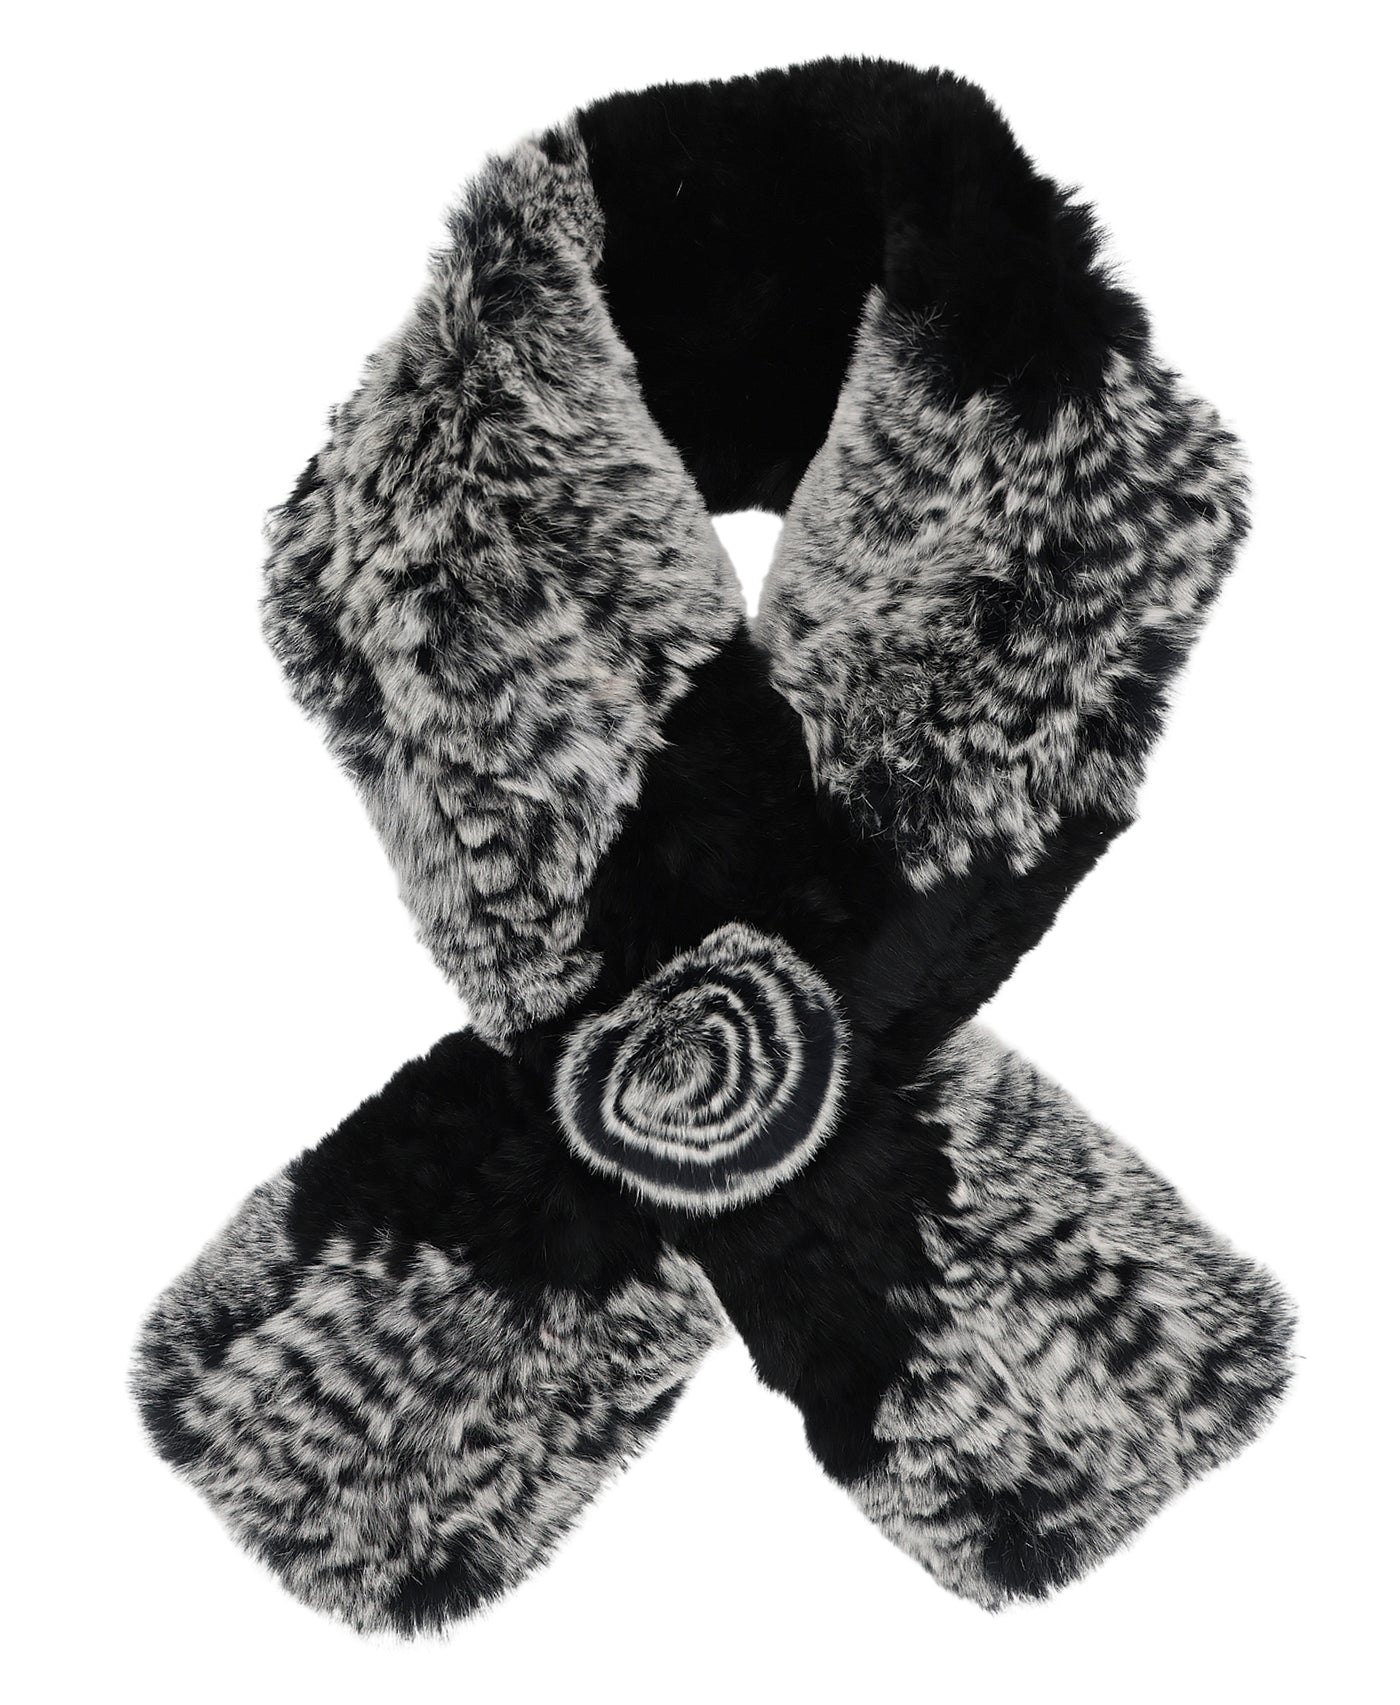 Two Tone Knitted Fur Scarf image 1